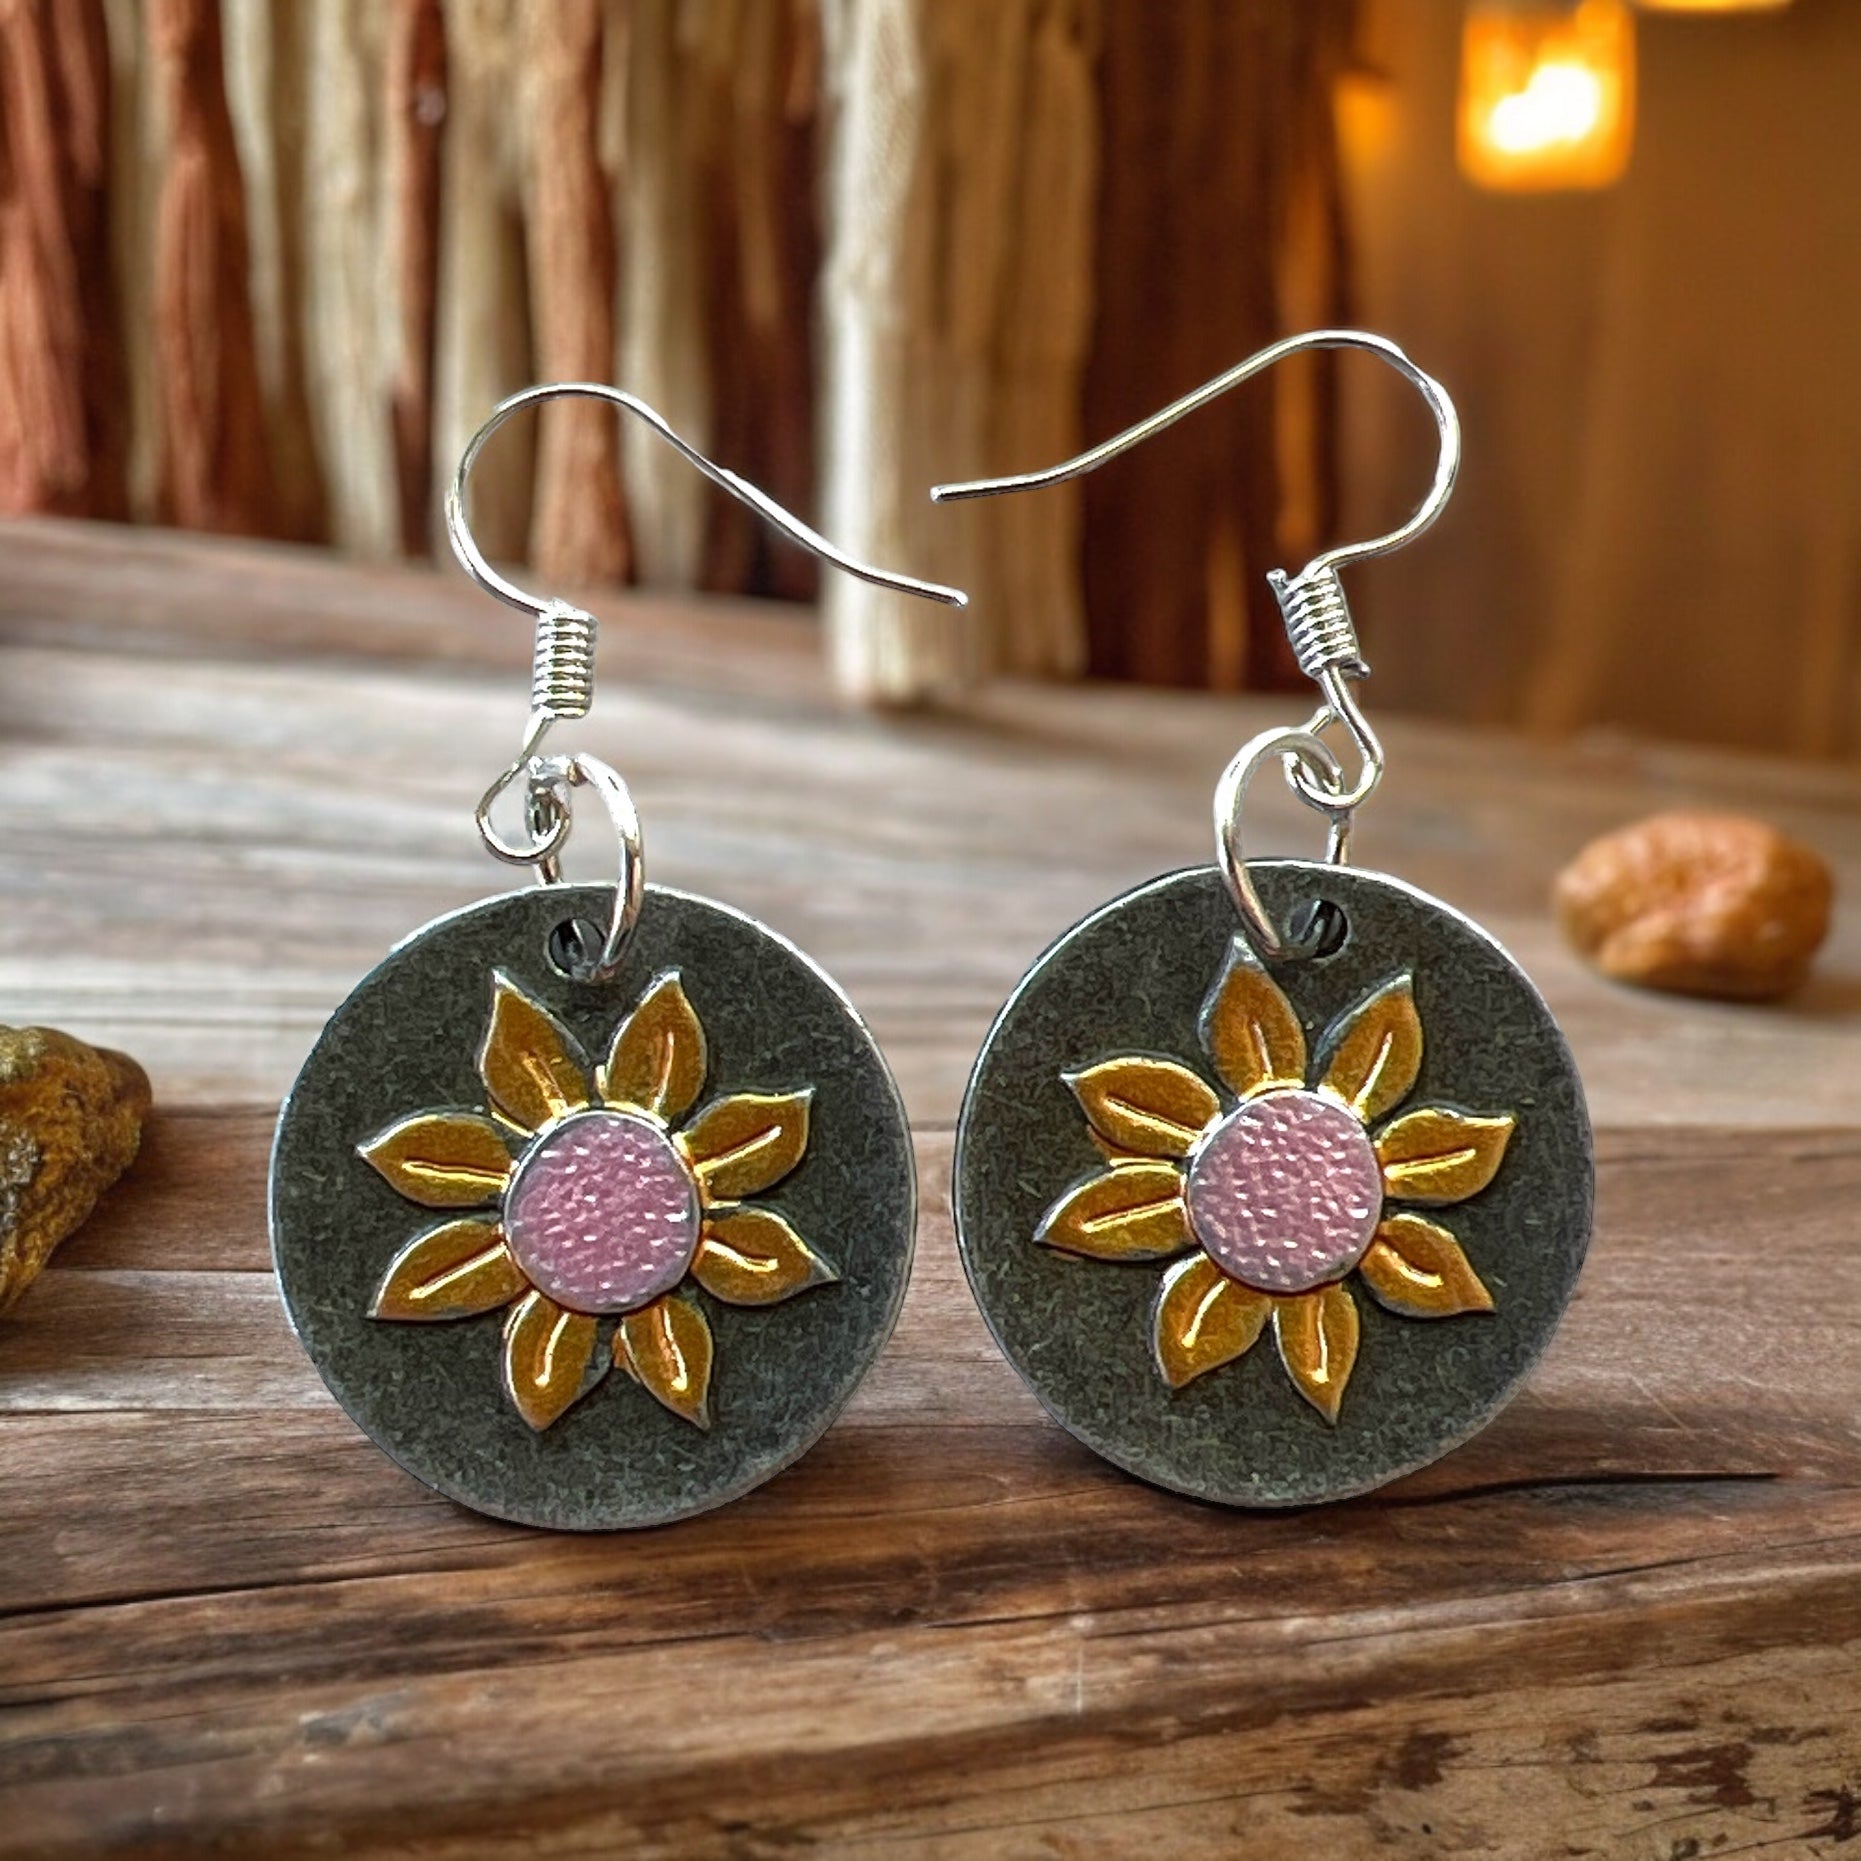 Round Silver Earrings with Sunflowers: Nature-Inspired Accessories